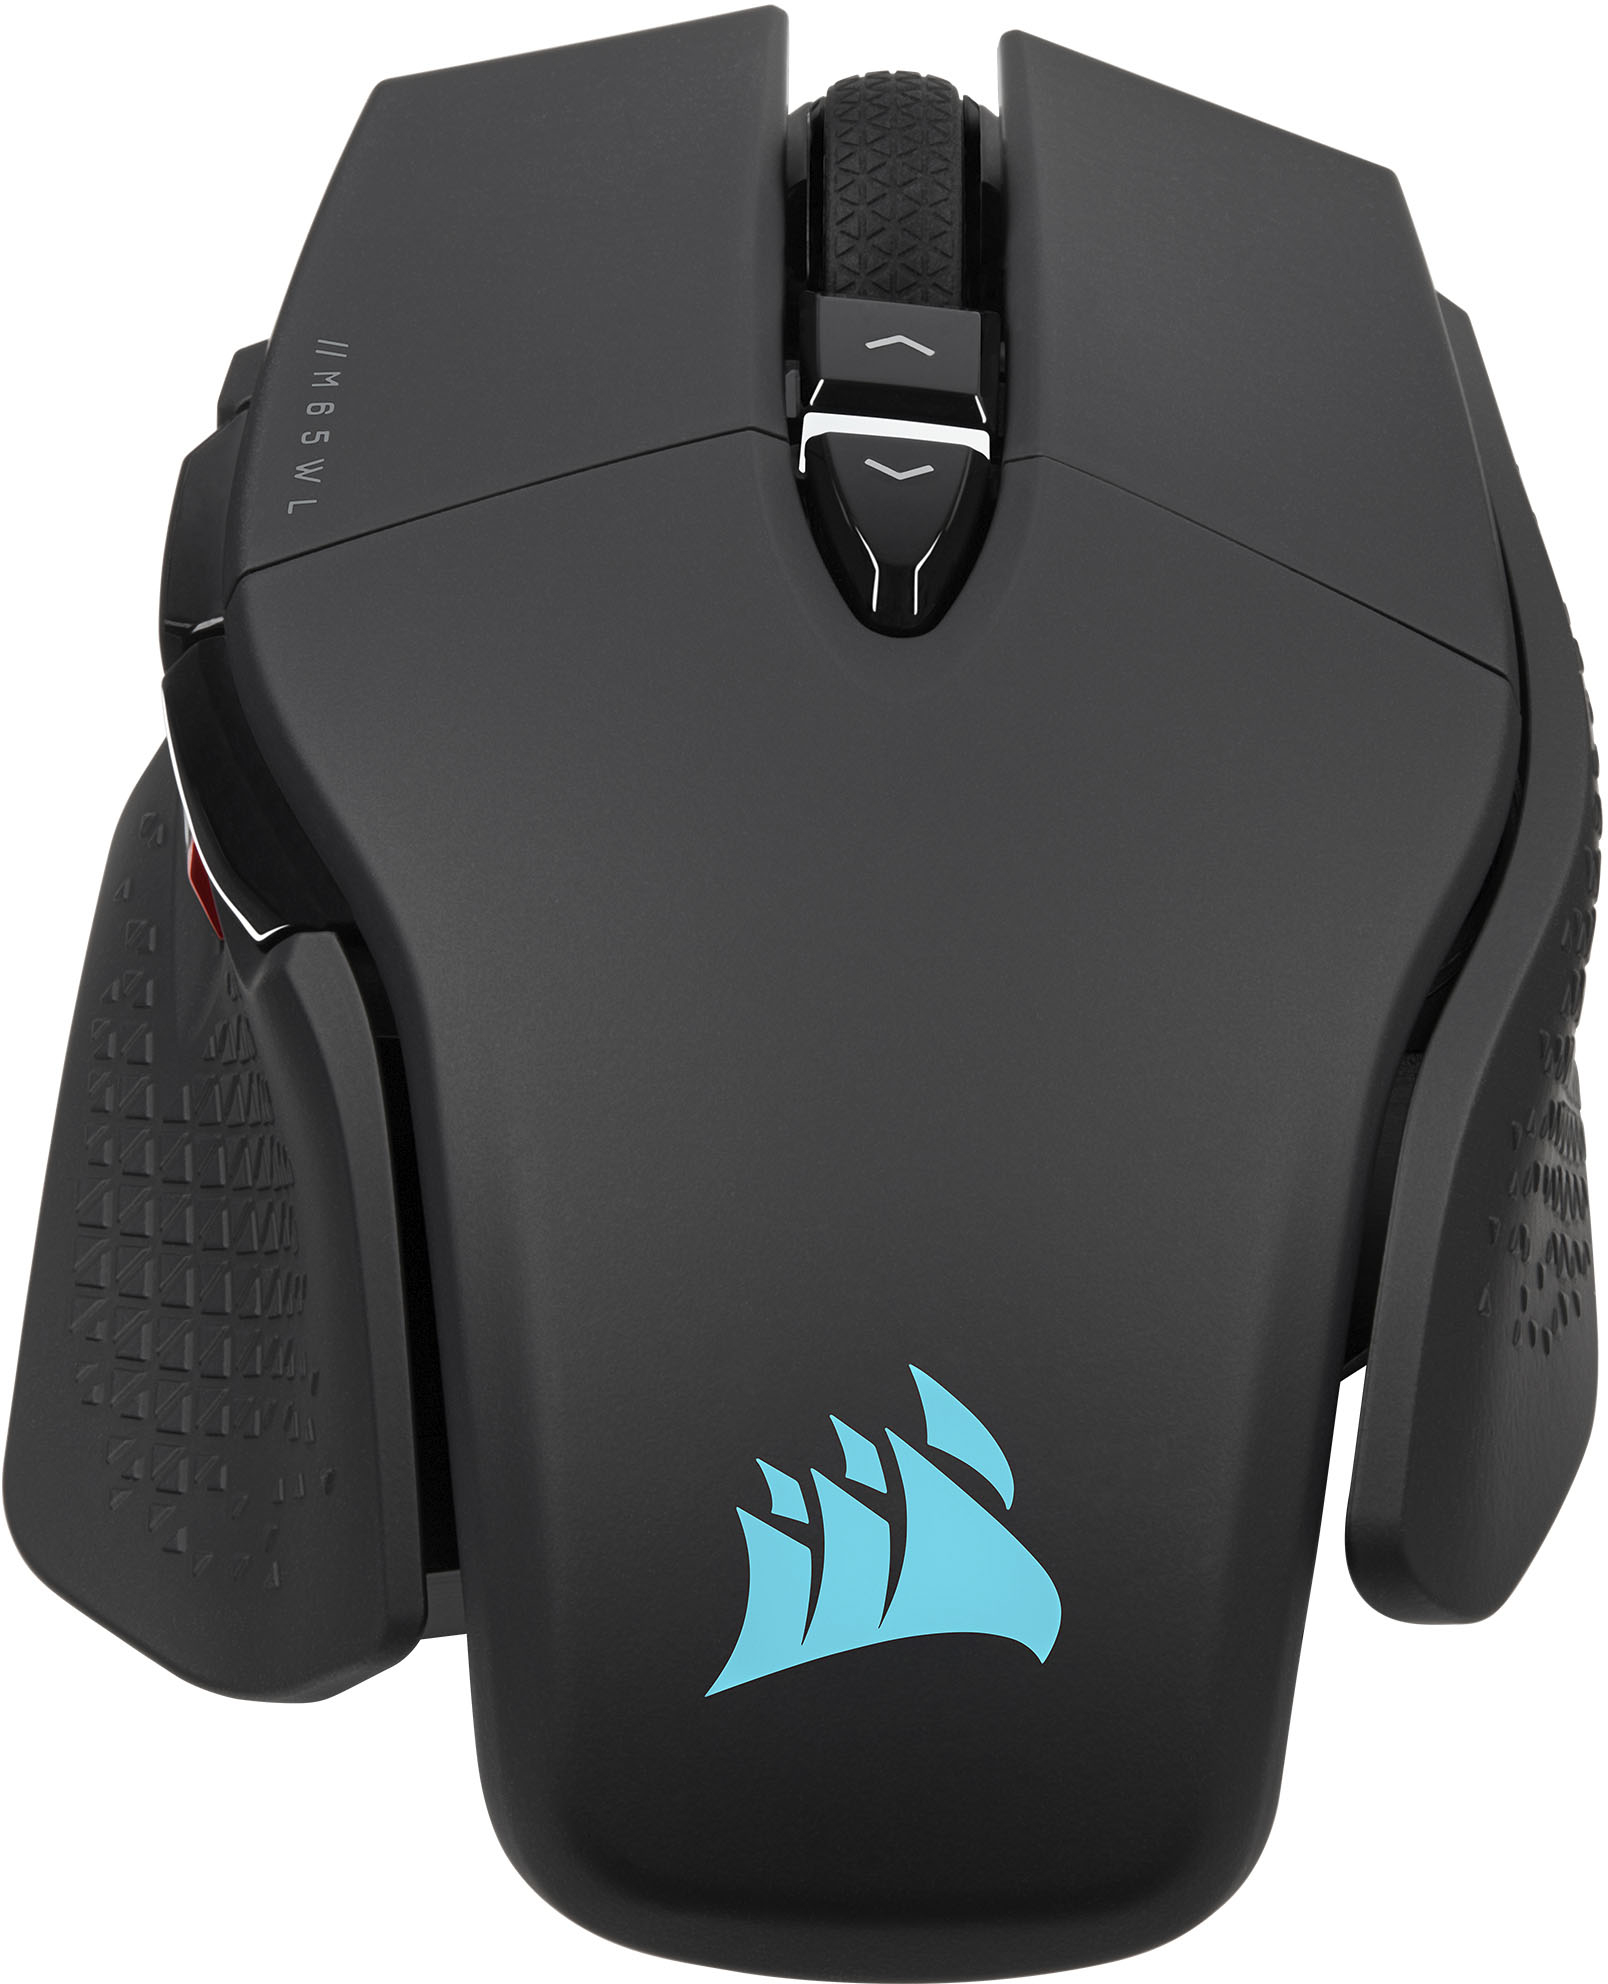 M65 Ultra Wireless Optical Gaming Mouse with Slipstream Technology Black CH-9319411-NA2 - Best Buy